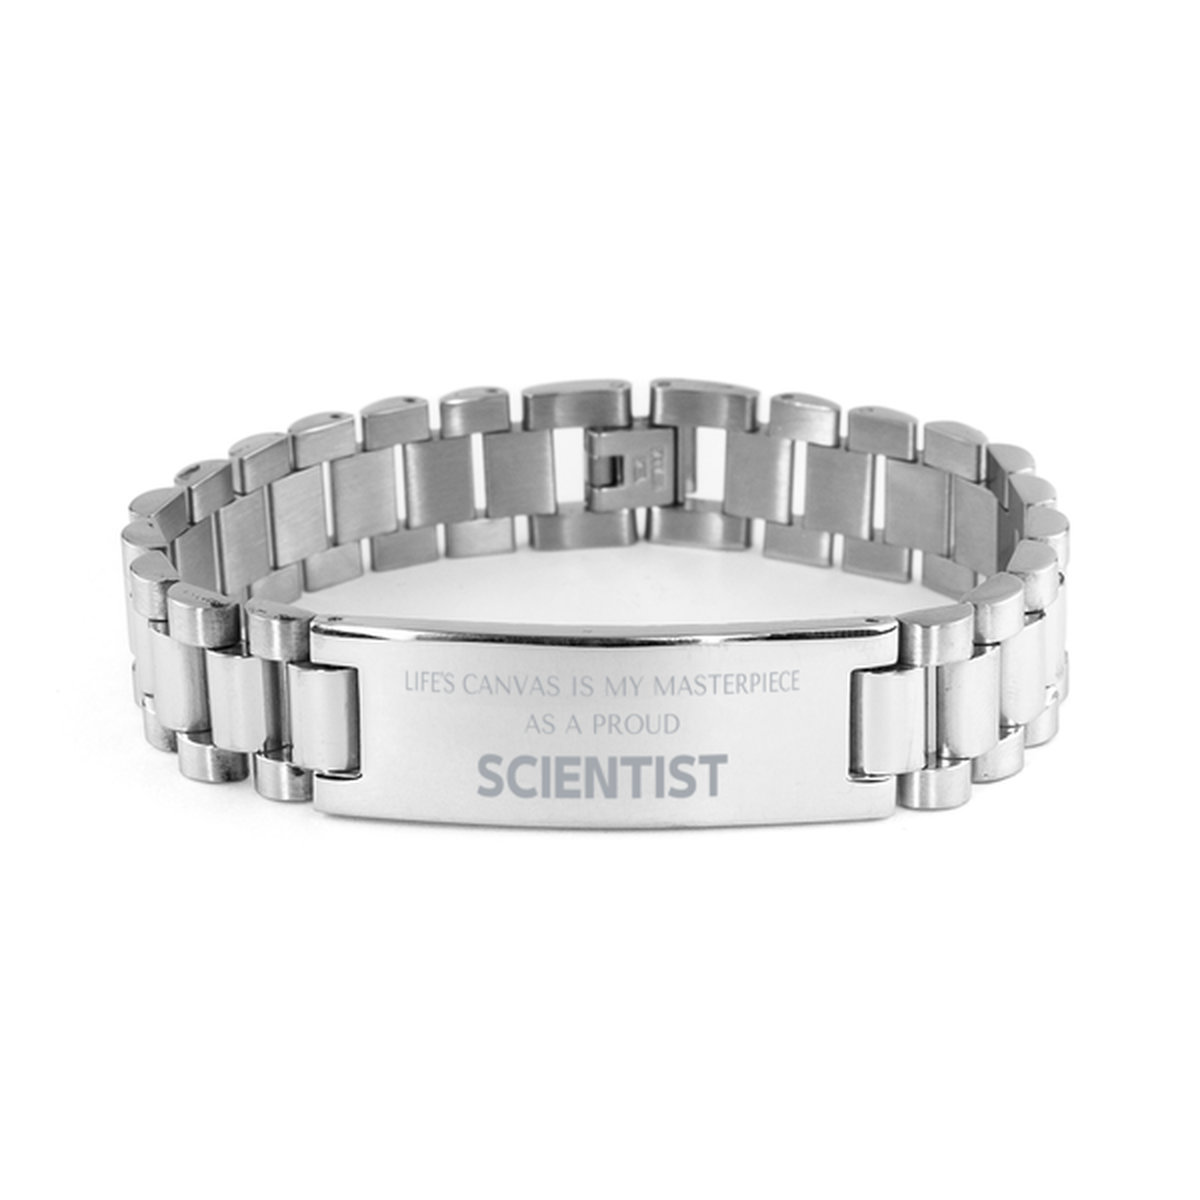 Proud Scientist Gifts, Life's canvas is my masterpiece, Epic Birthday Christmas Unique Ladder Stainless Steel Bracelet For Scientist, Coworkers, Men, Women, Friends